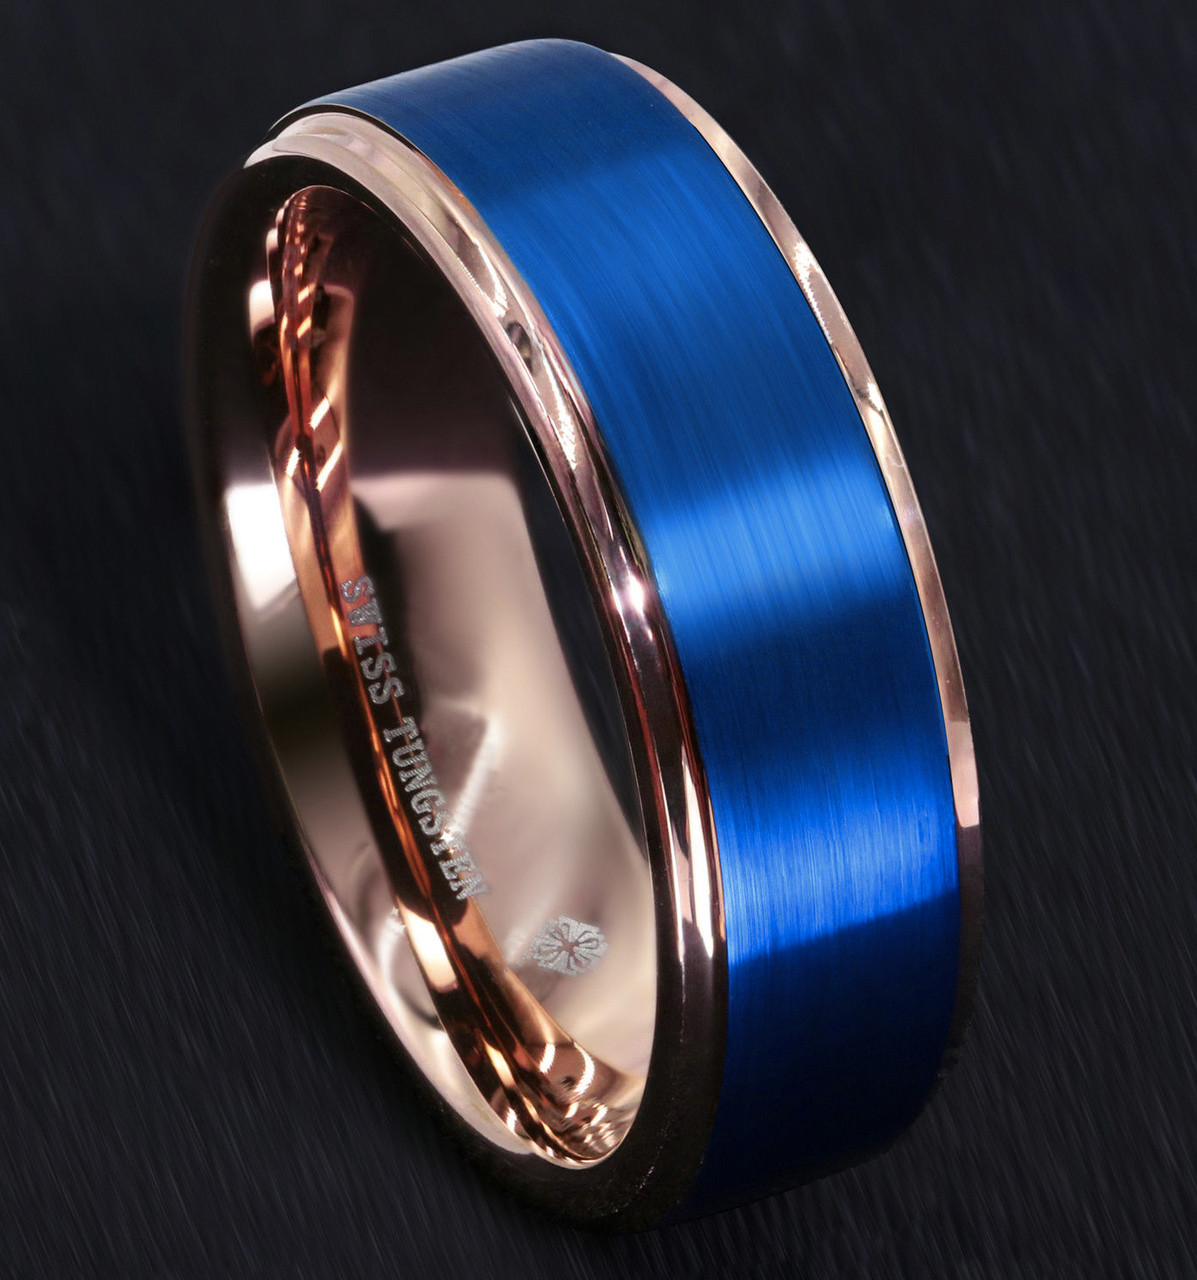 (8mm)  Unisex or Men's Tungsten Carbide Wedding ring band. 18K Rose Gold Ring with Blue Matte Finish Top